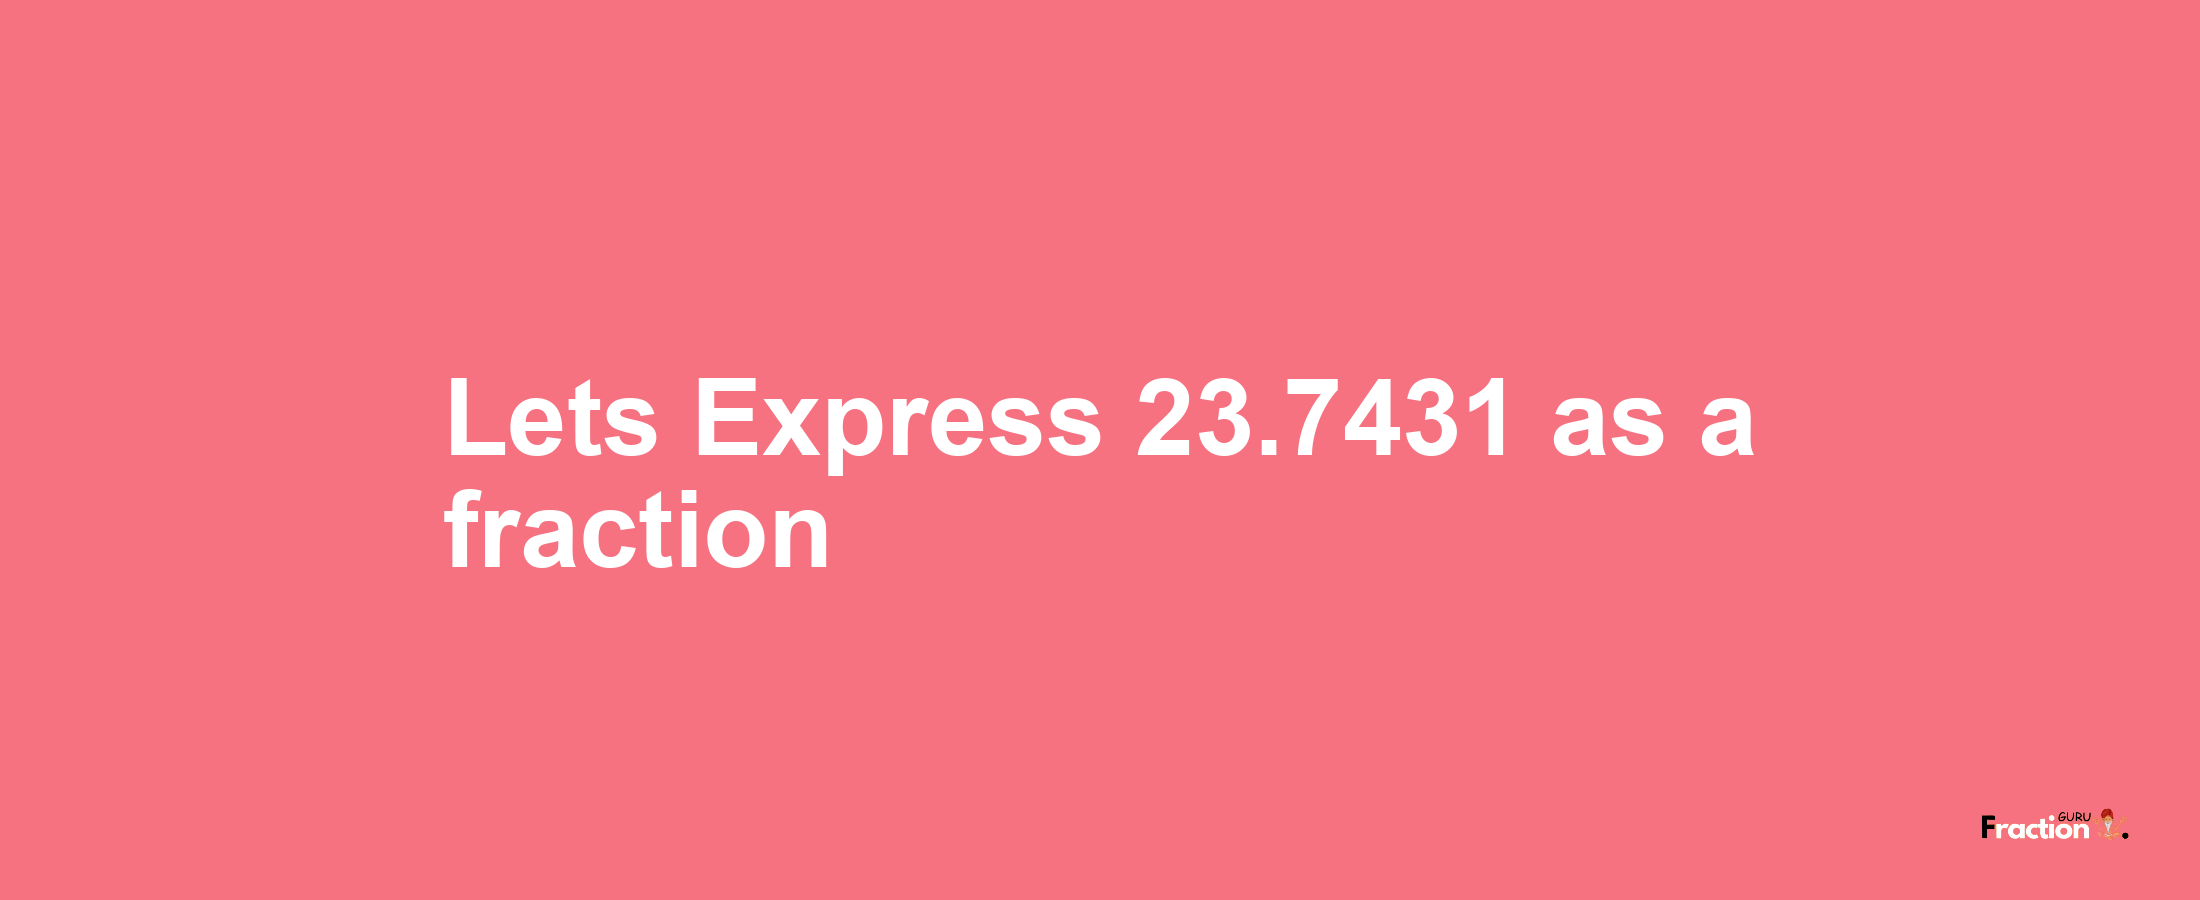 Lets Express 23.7431 as afraction